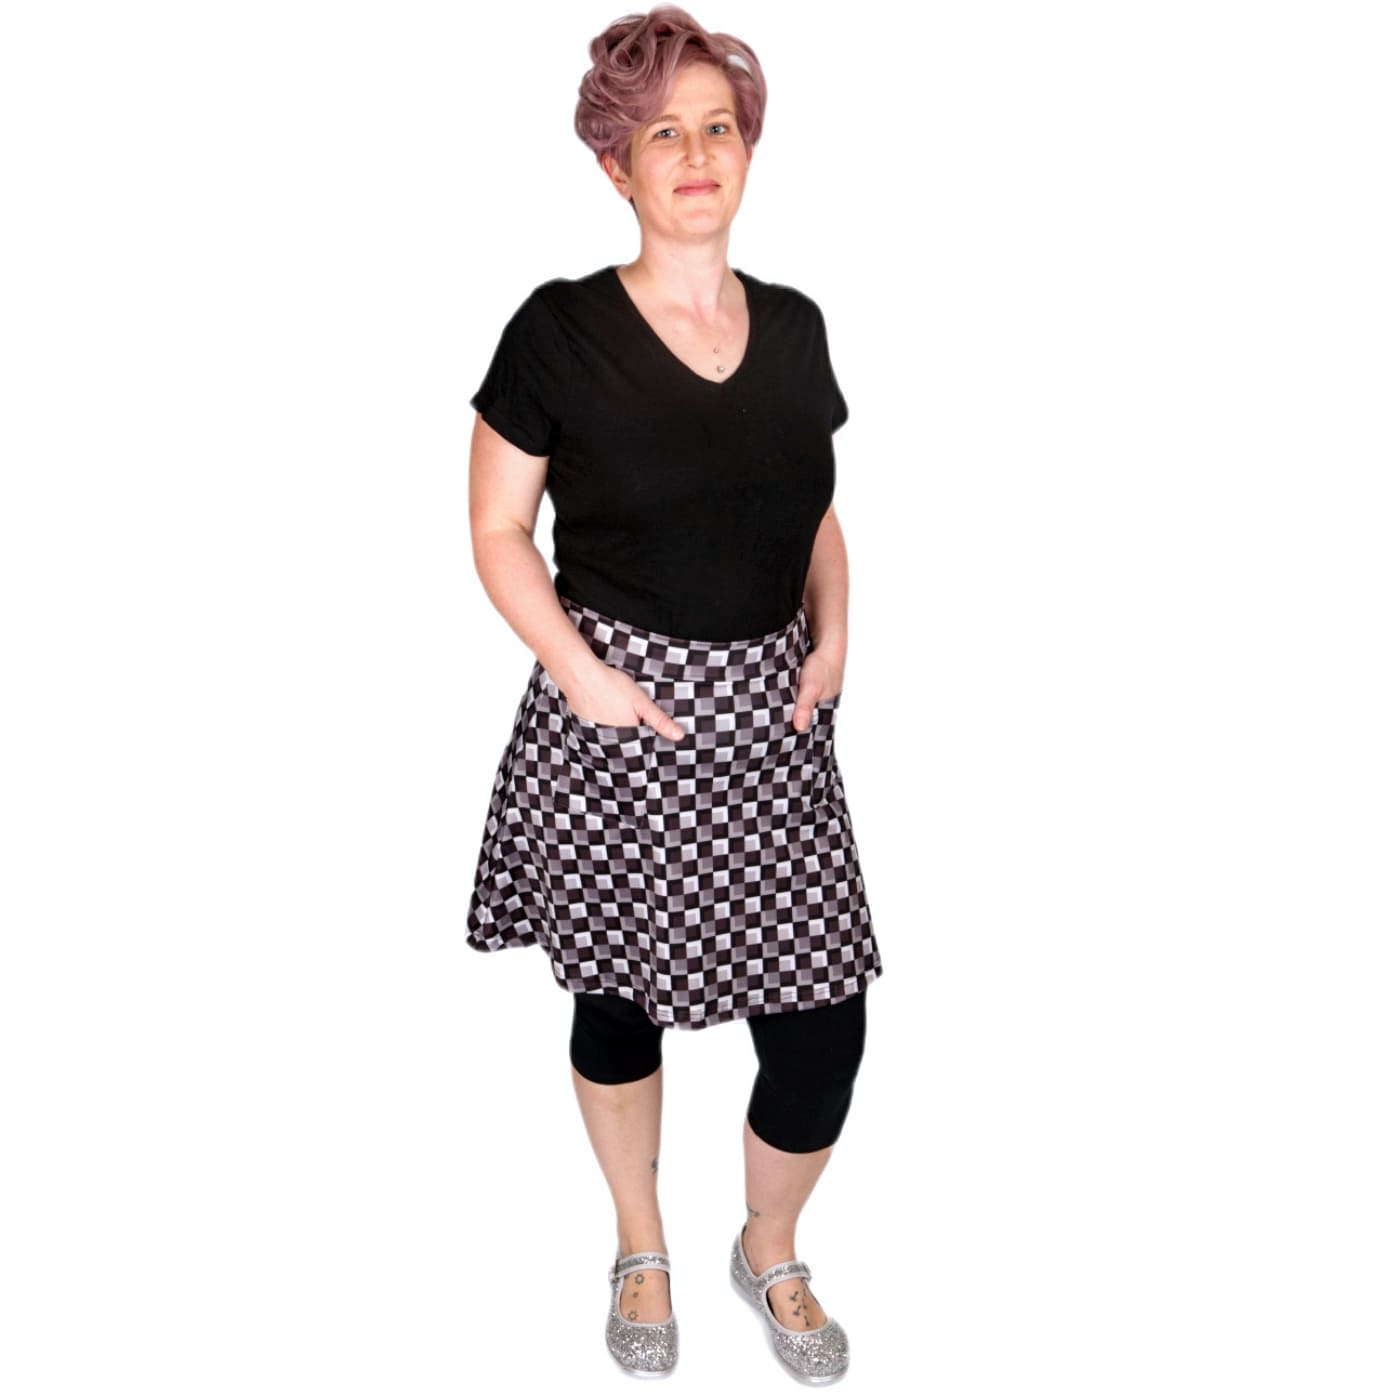 Too Square Short Skirt by RainbowsAndFairies.com.au (Check Print - Black - White - Grey - Kitsch - Aline Skirt With Pockets - Vintage Inspired) - SKU: CL_SHORT_TOOSQ_ORG - Pic-05